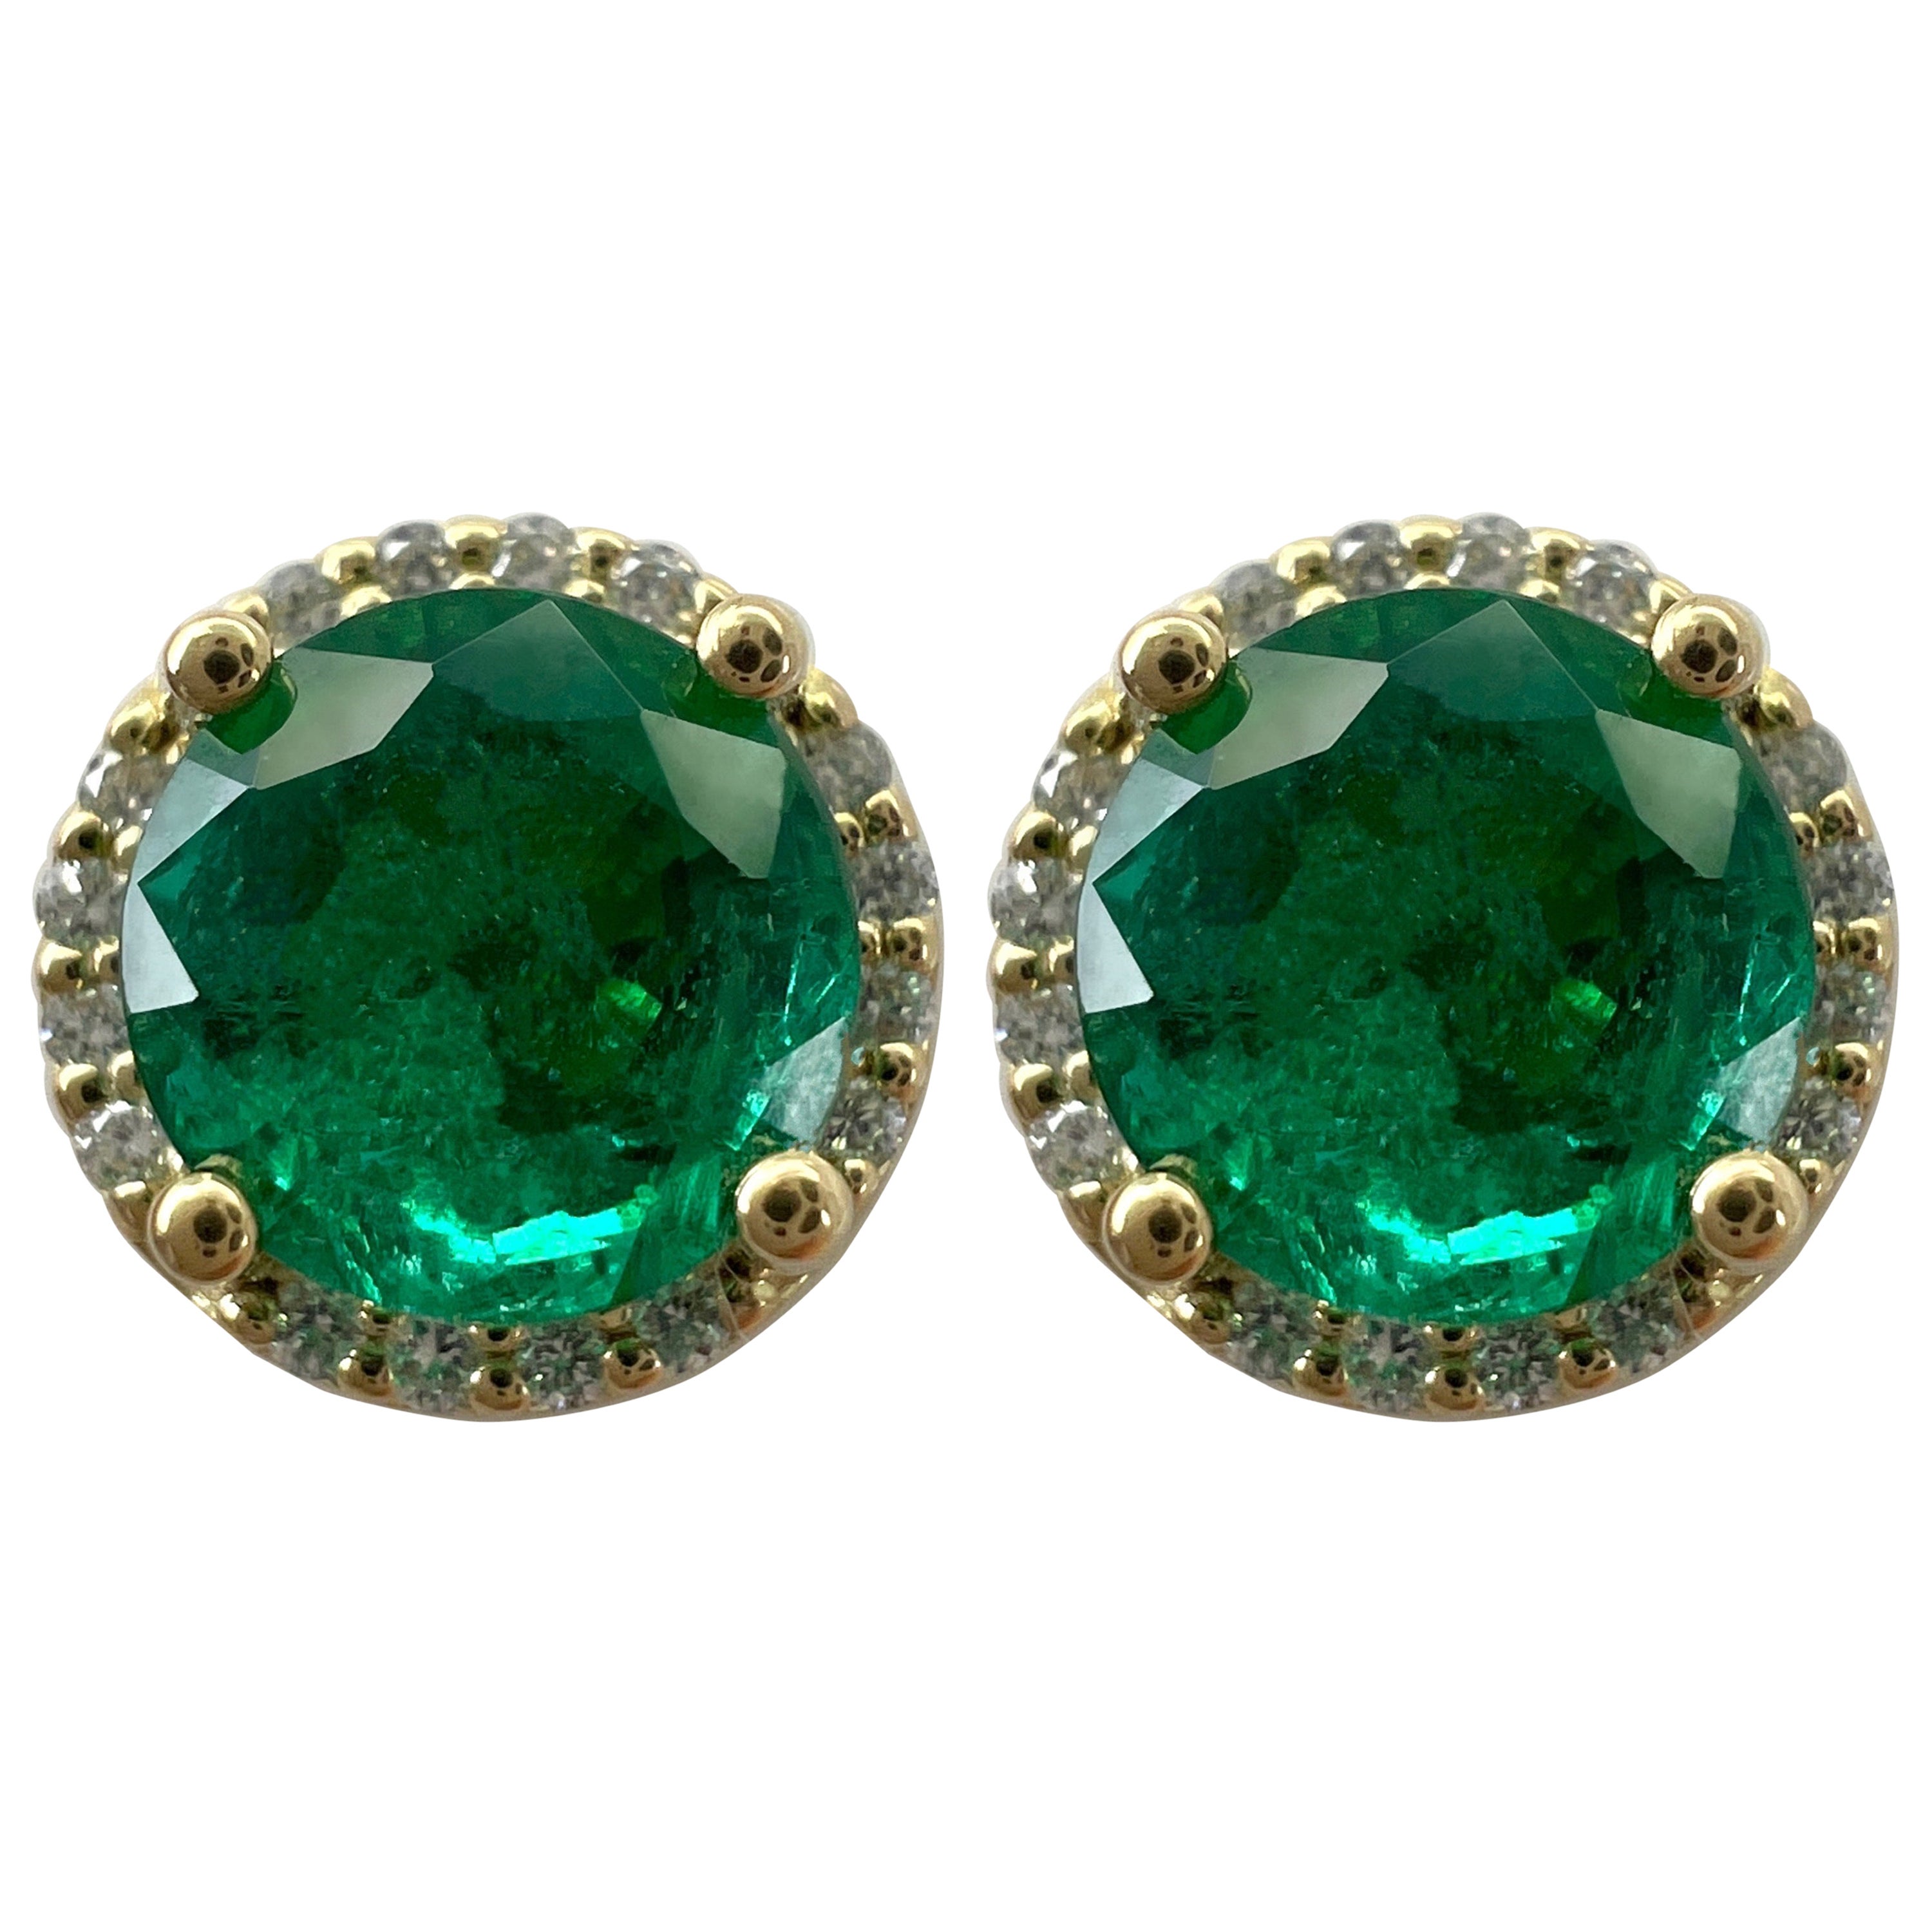 1.59 Ct Vivid Green Emerald Diamond Round Cut 18k Yellow Gold Halo Earring Studs For Sale